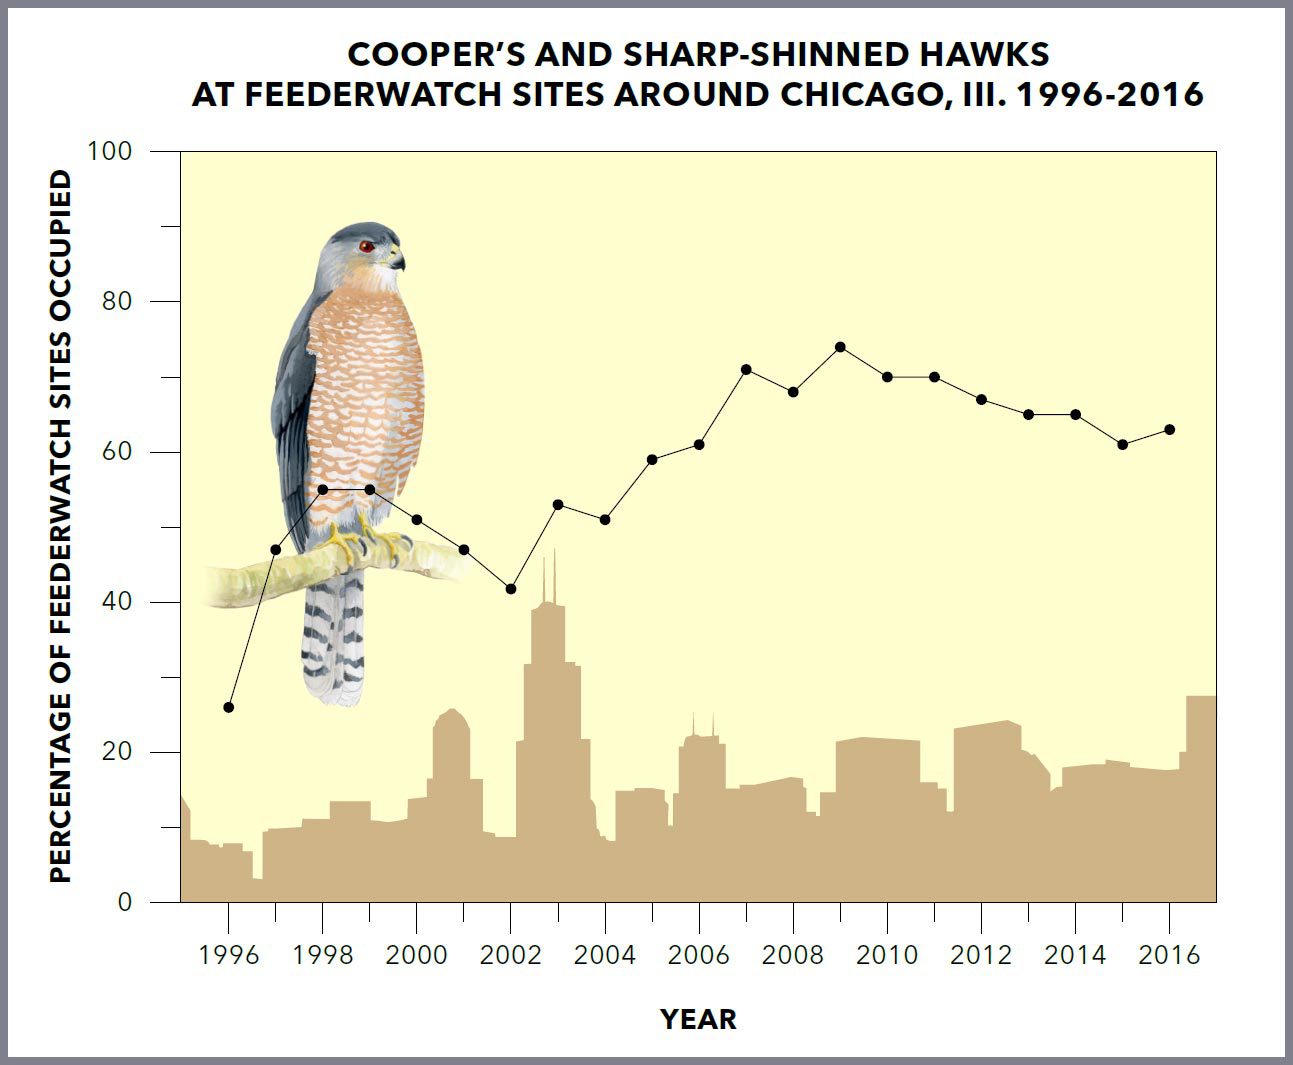 Data from 554 Project FeederWatch sites in the greater Chicago area showed that Cooper’s and Sharp-shinned Hawks visited 27% (around 150) of feeders in 1996, compared with 63% (around 350) in 2016. Graphic by Bartels Science Illustrator Jessica French.